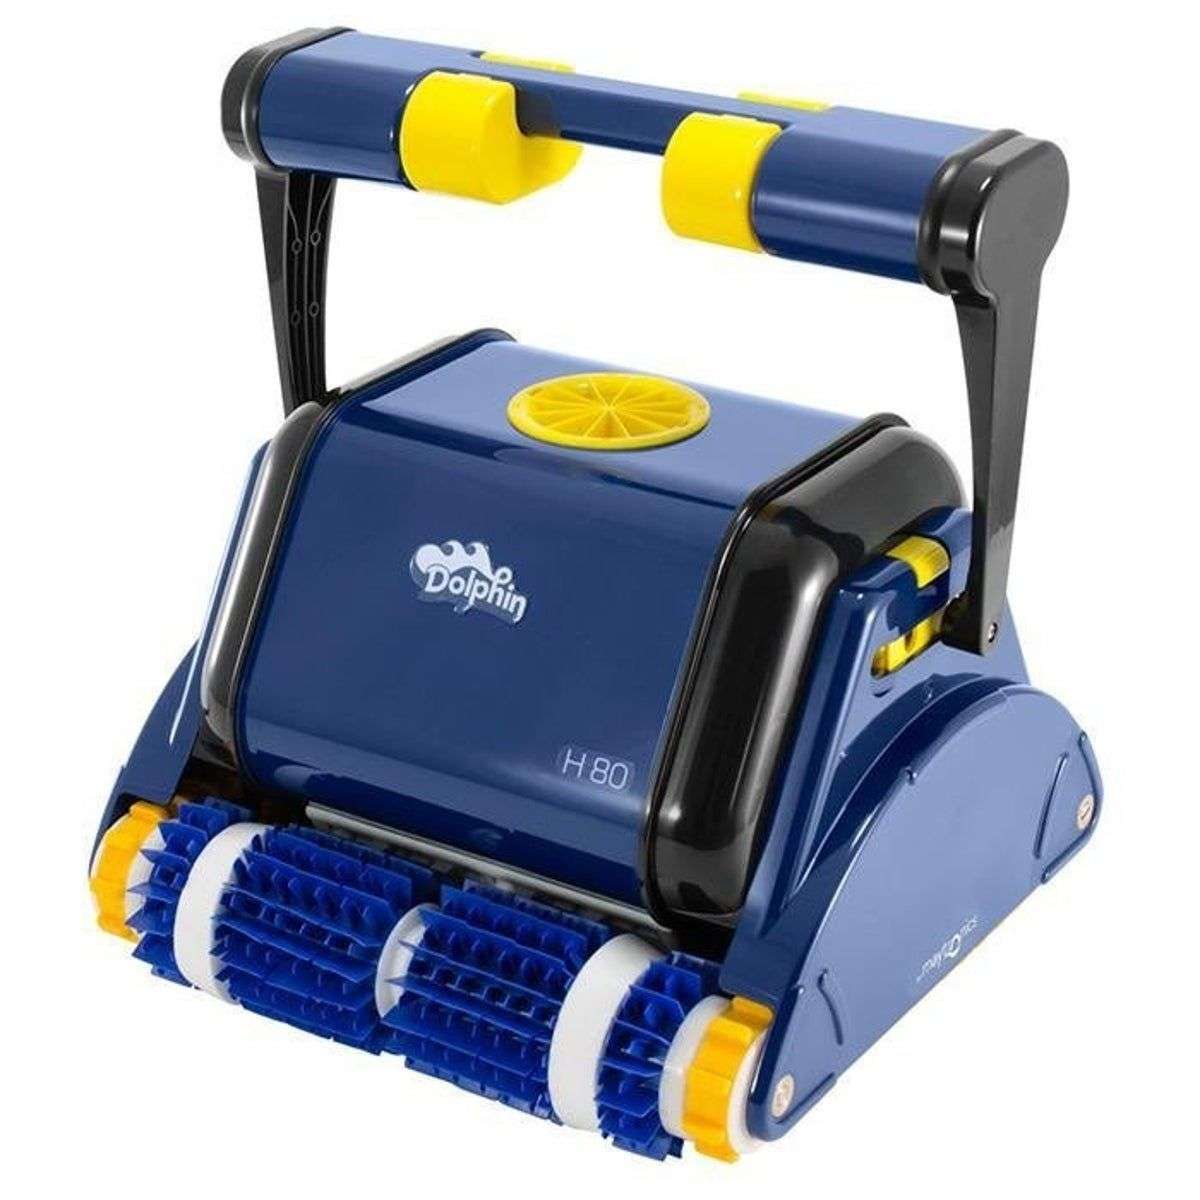 Dolphin H80 pool cleaner